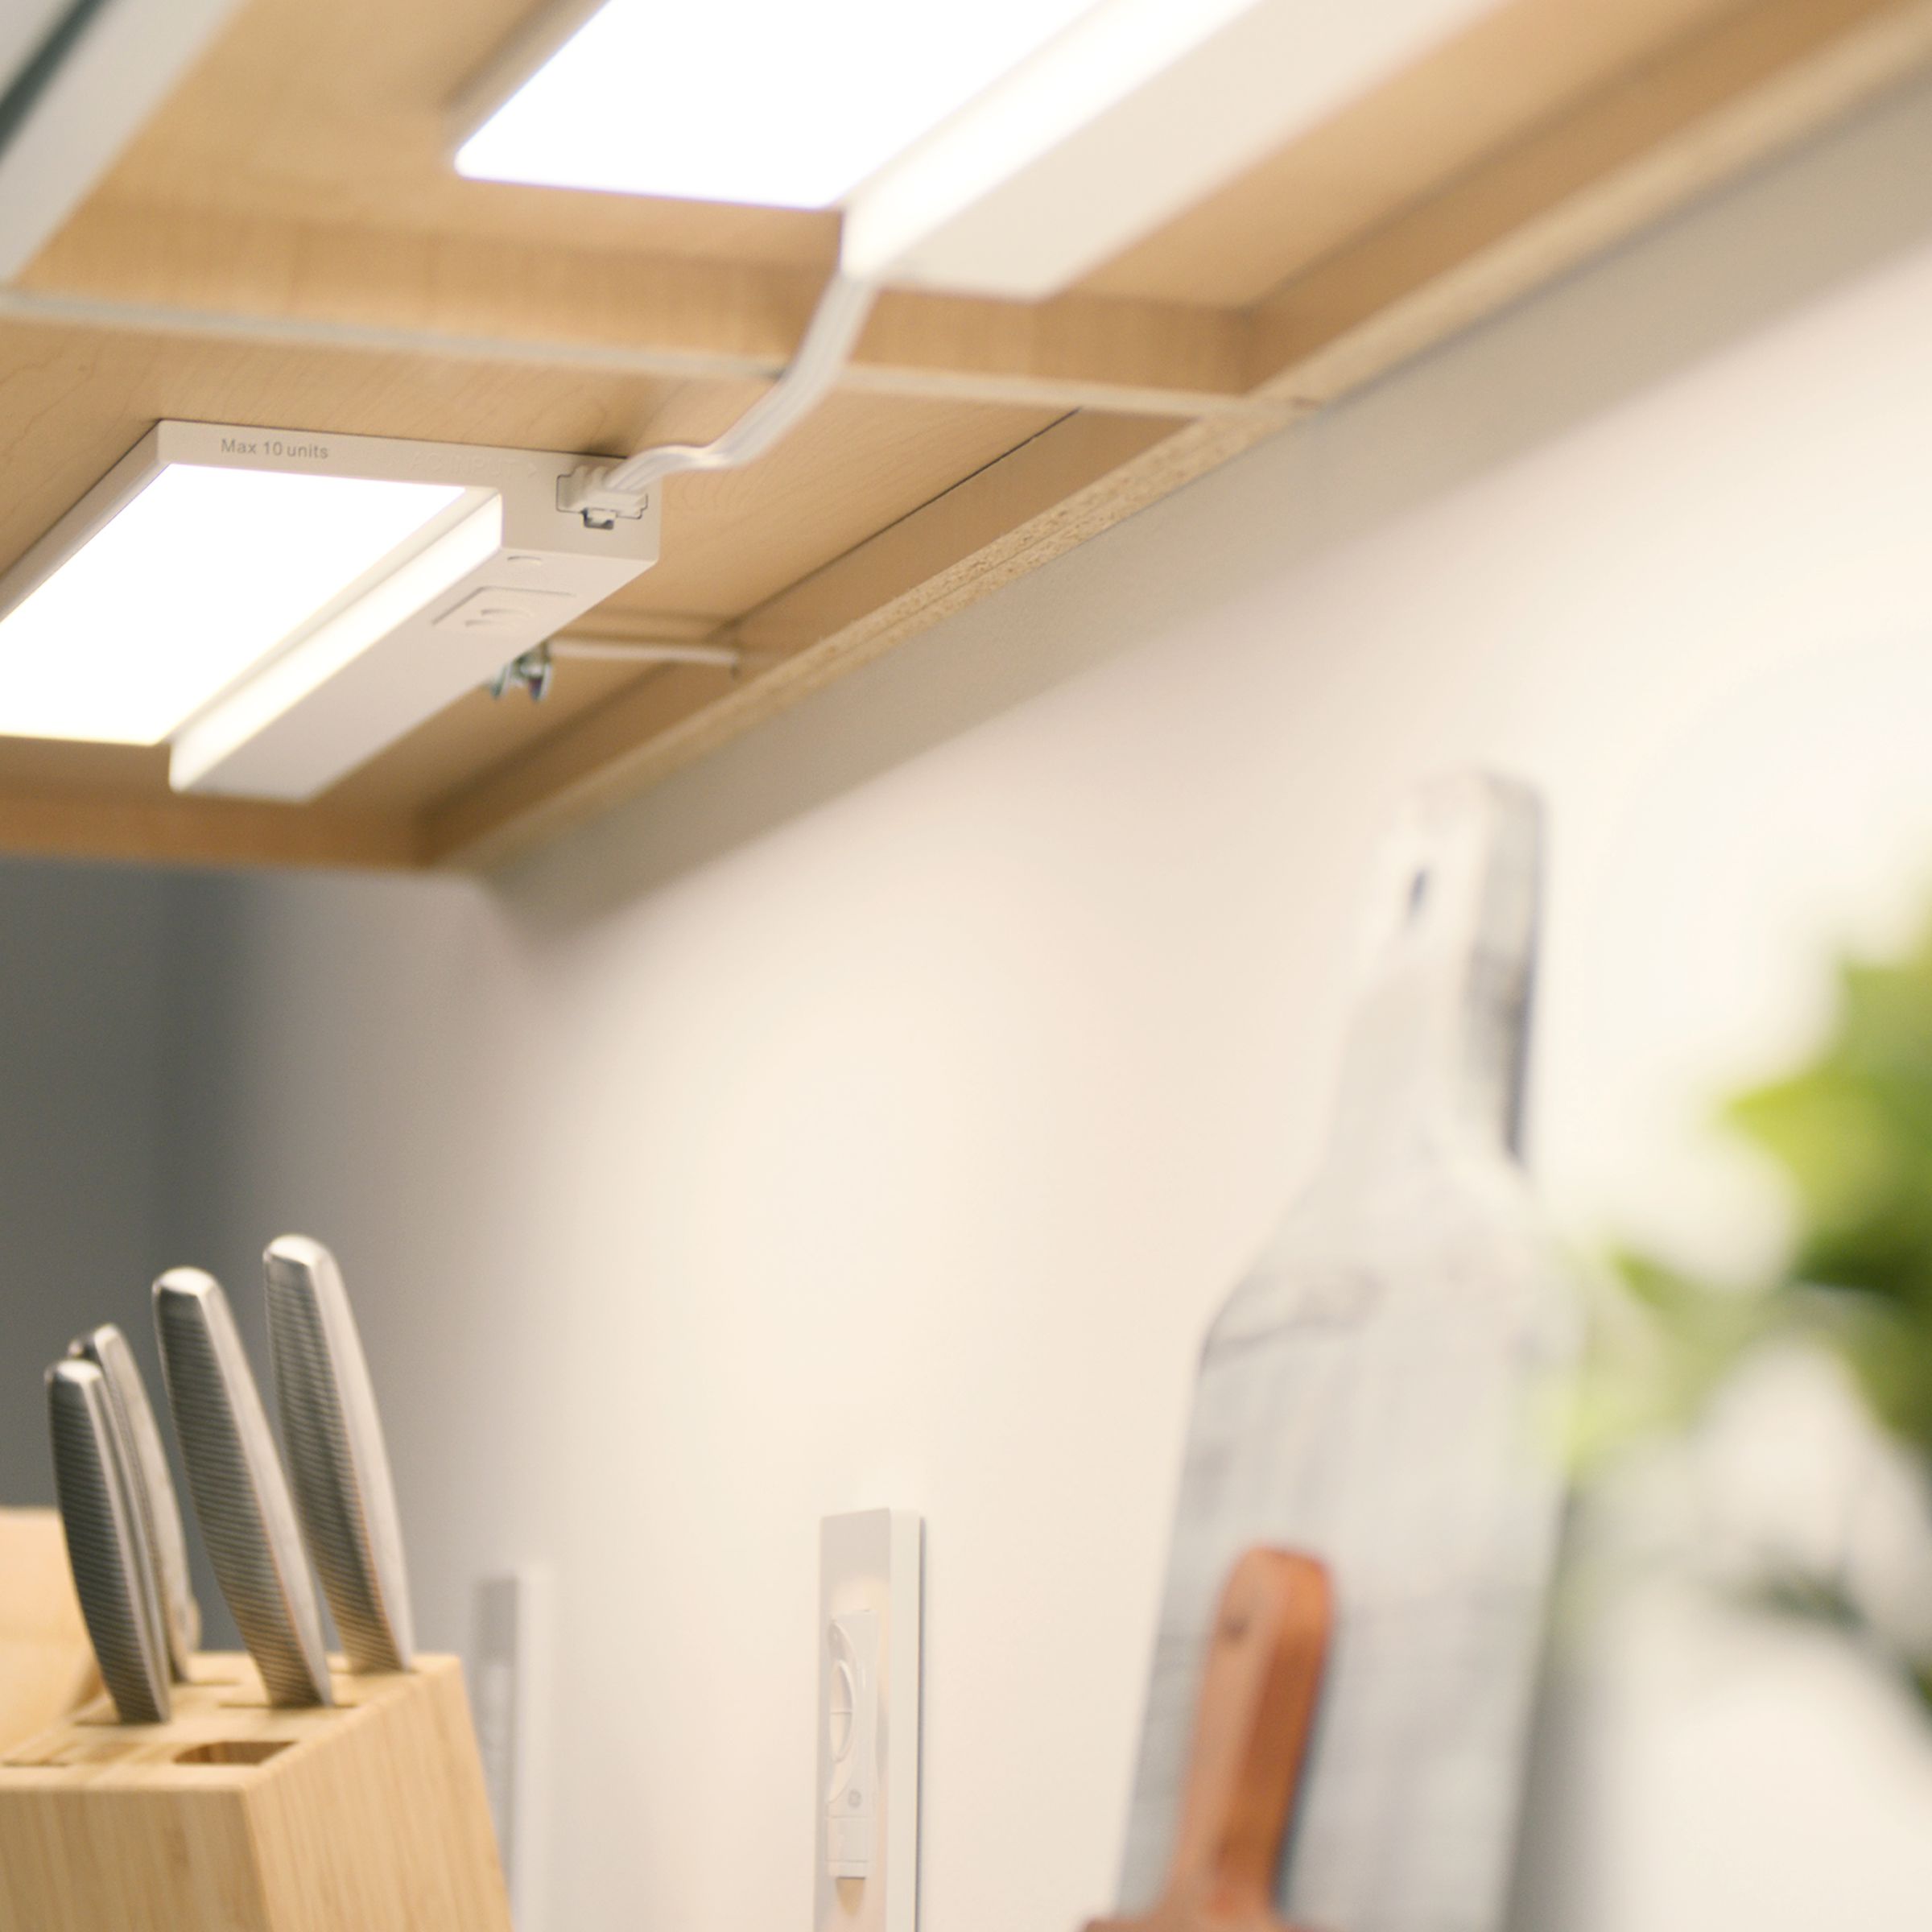 GE Cync’s new undercabinet smart lights bring task lighting, dimming, and full color to your kitchen countertops.